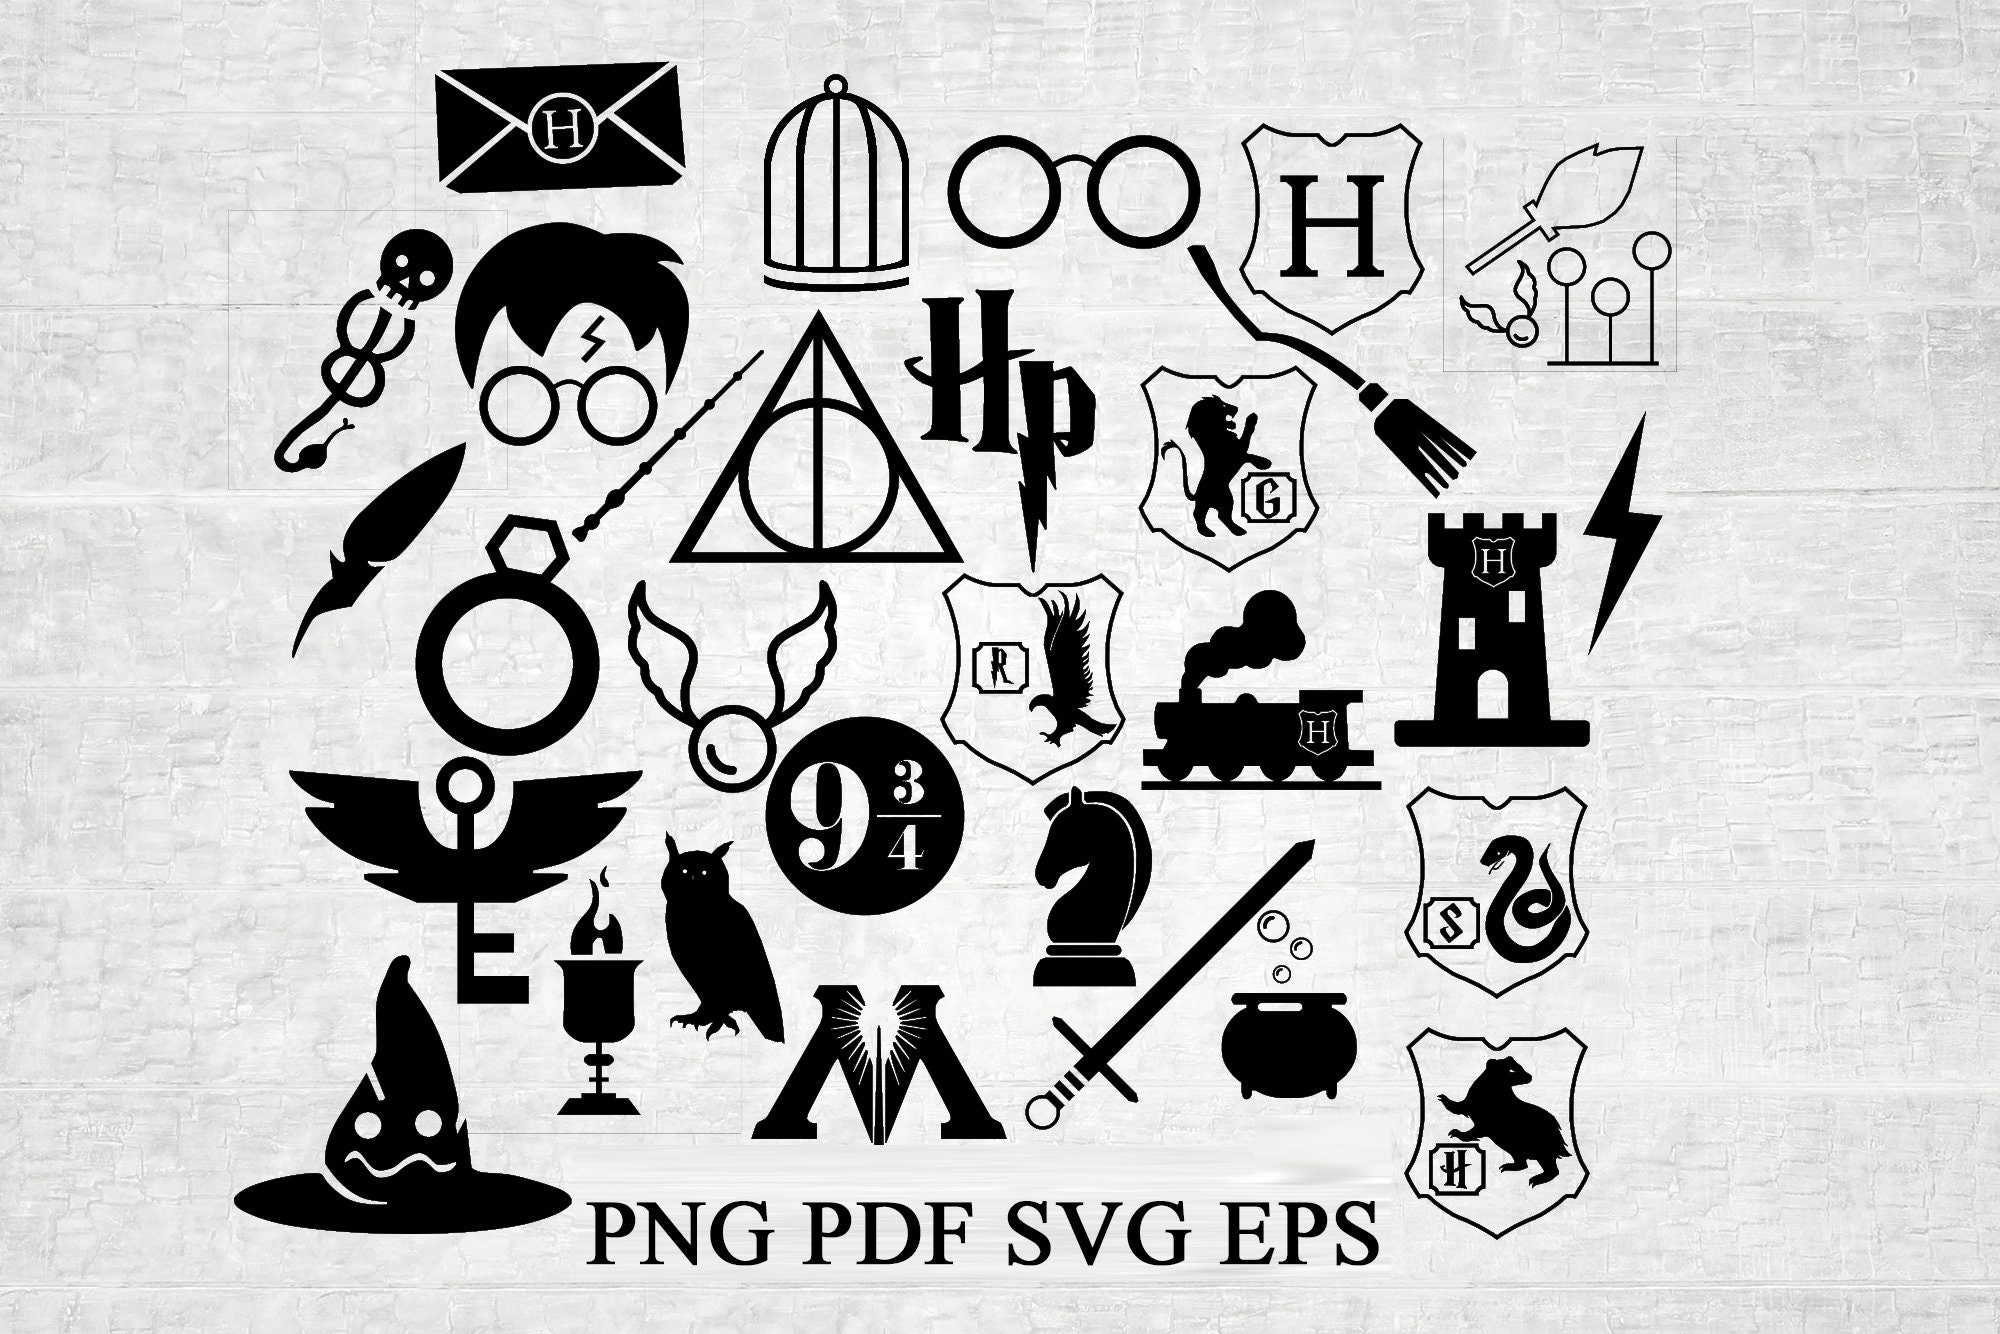 Cut Out Harry Potter Svg Free - Free SVG Cut Files